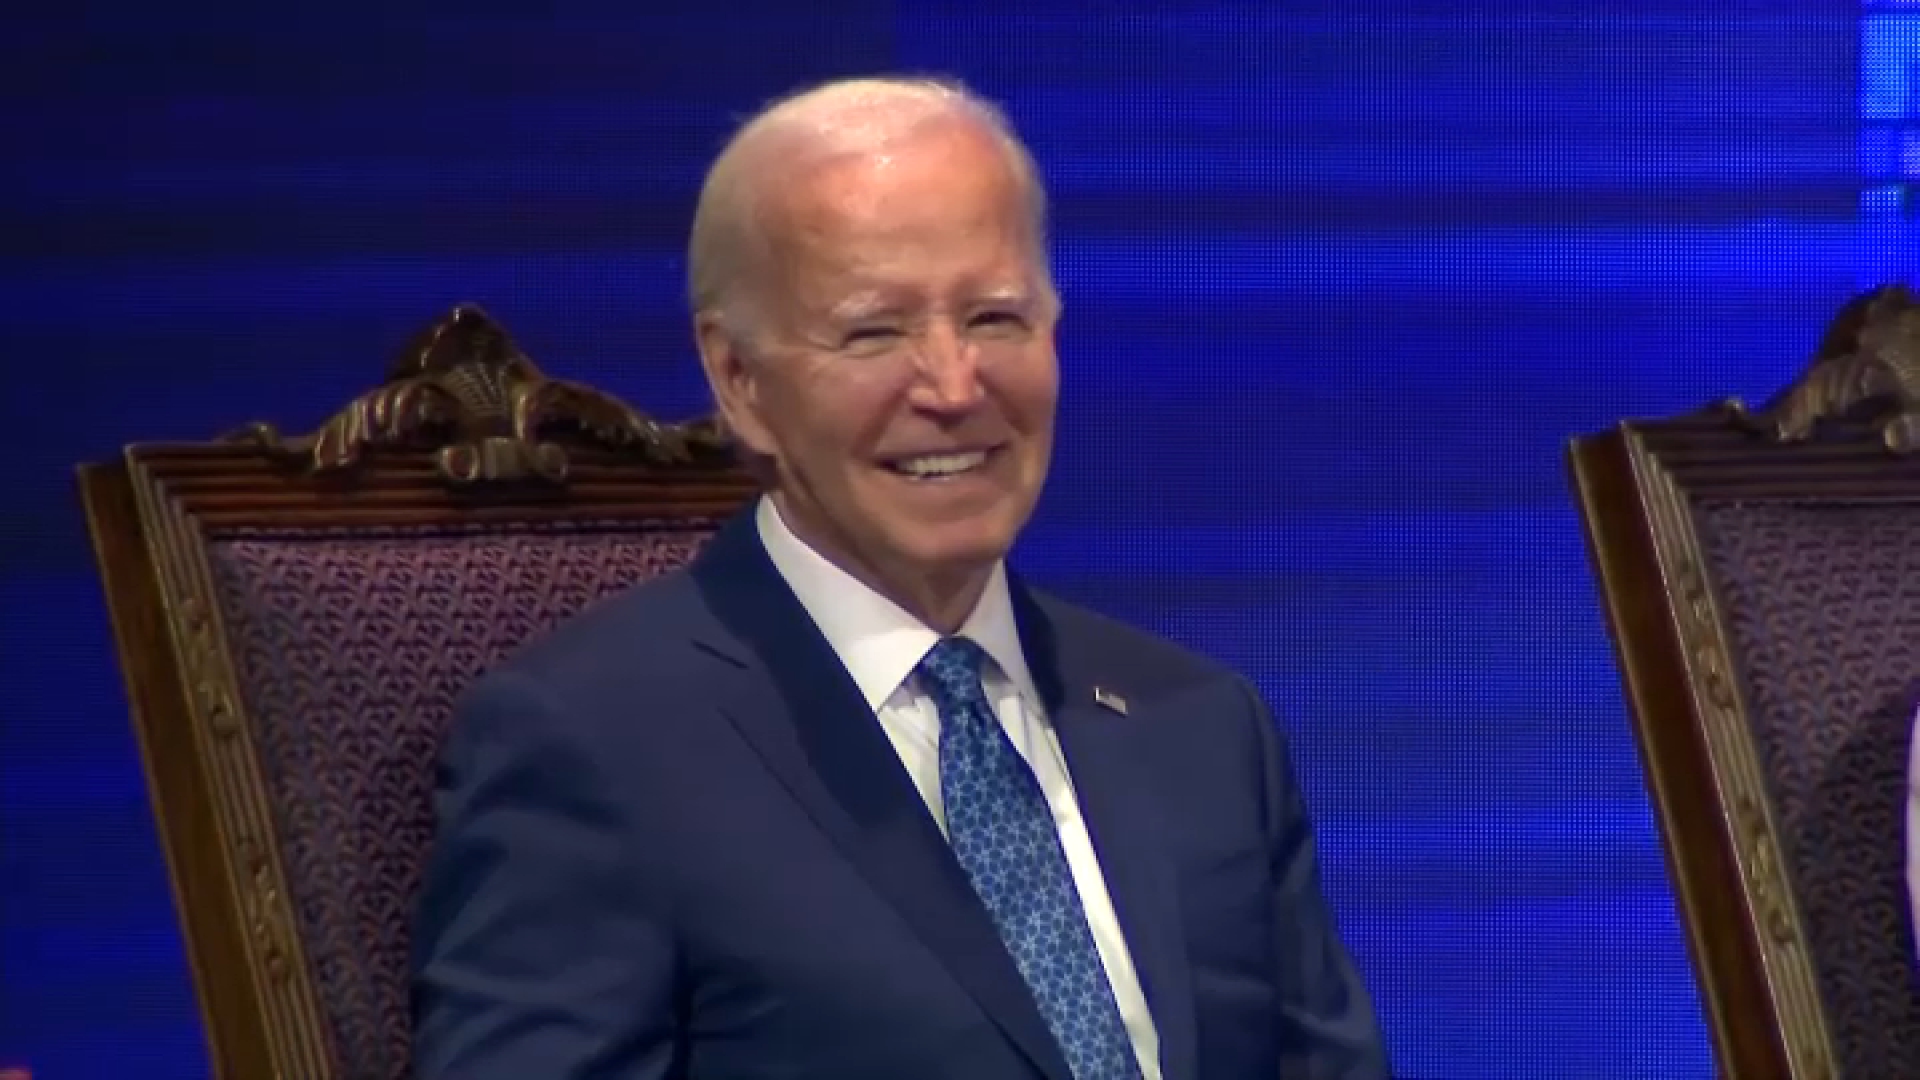 Biden tells supporters to ‘stick together' amid growing calls for him to leave the presidential race